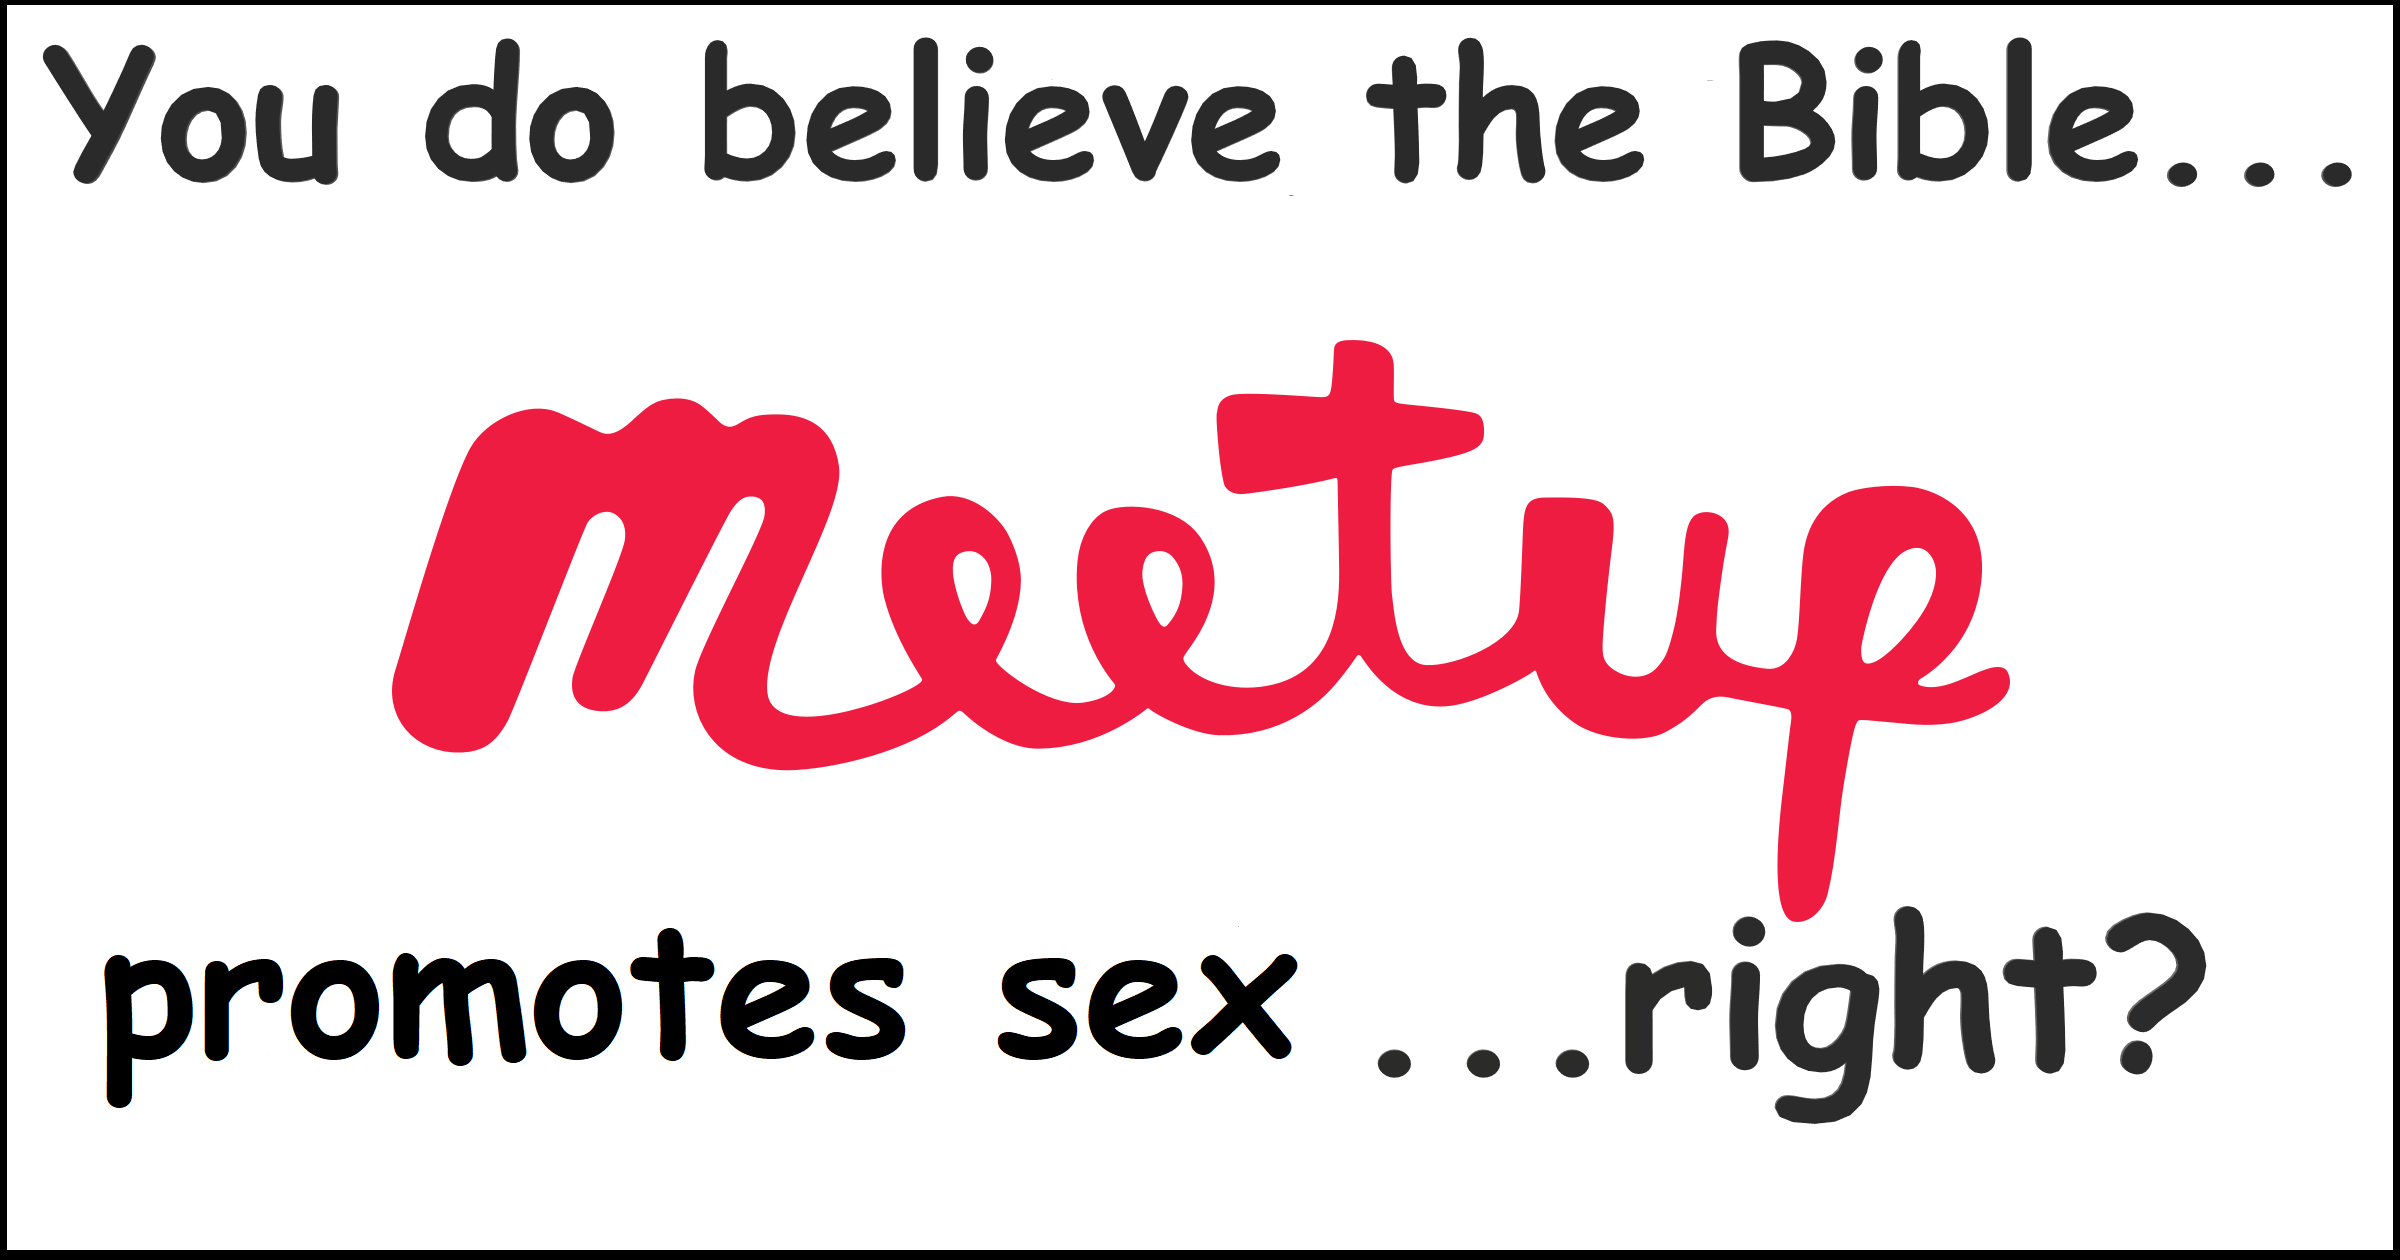 Bible promotion meetup group to discuss Bible promotion of polygamy and associated issues